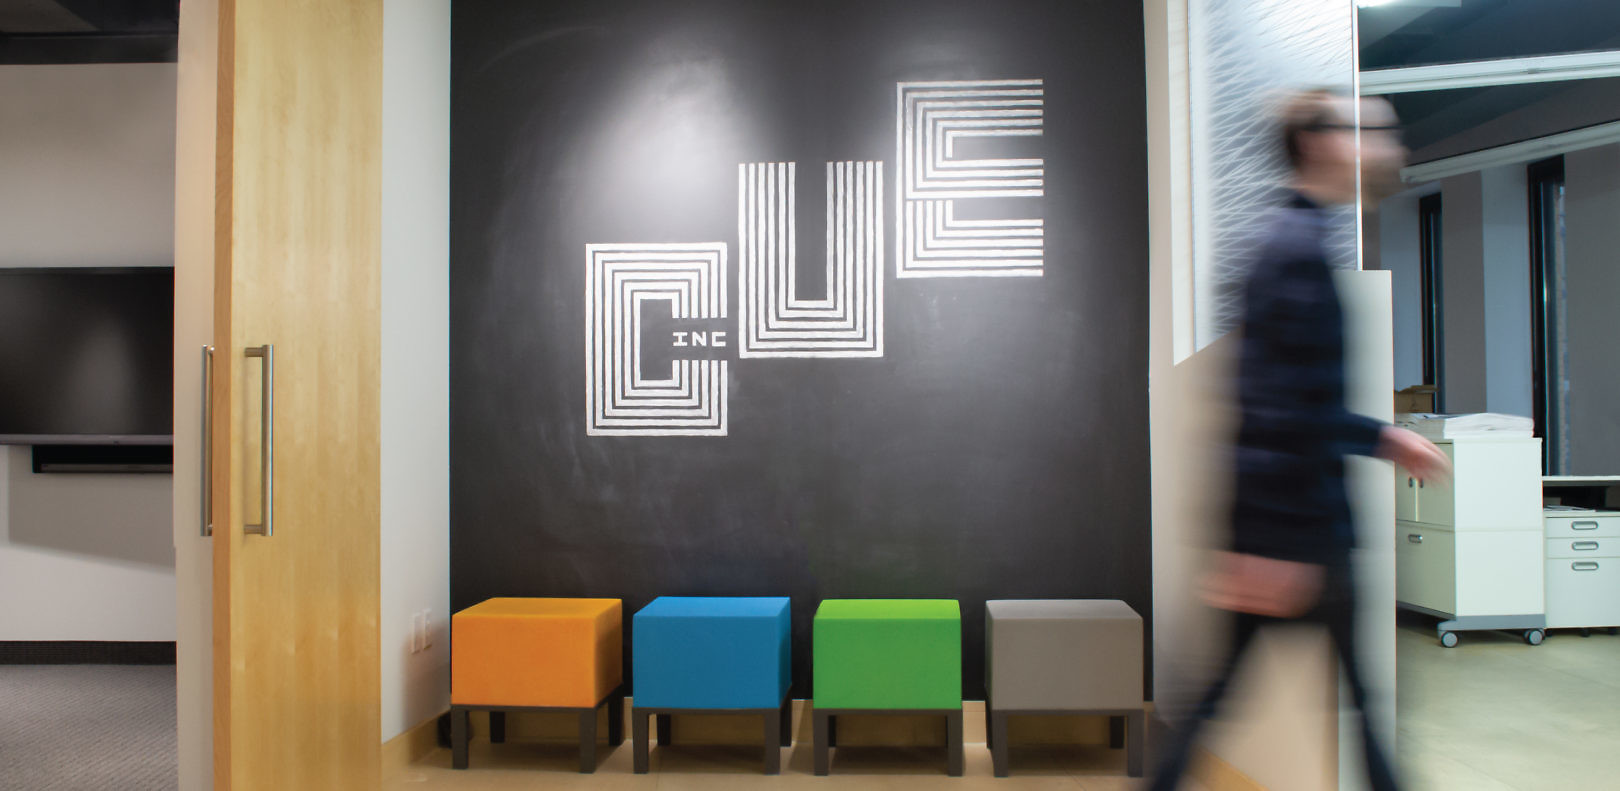 Cue | Brand design with meaning